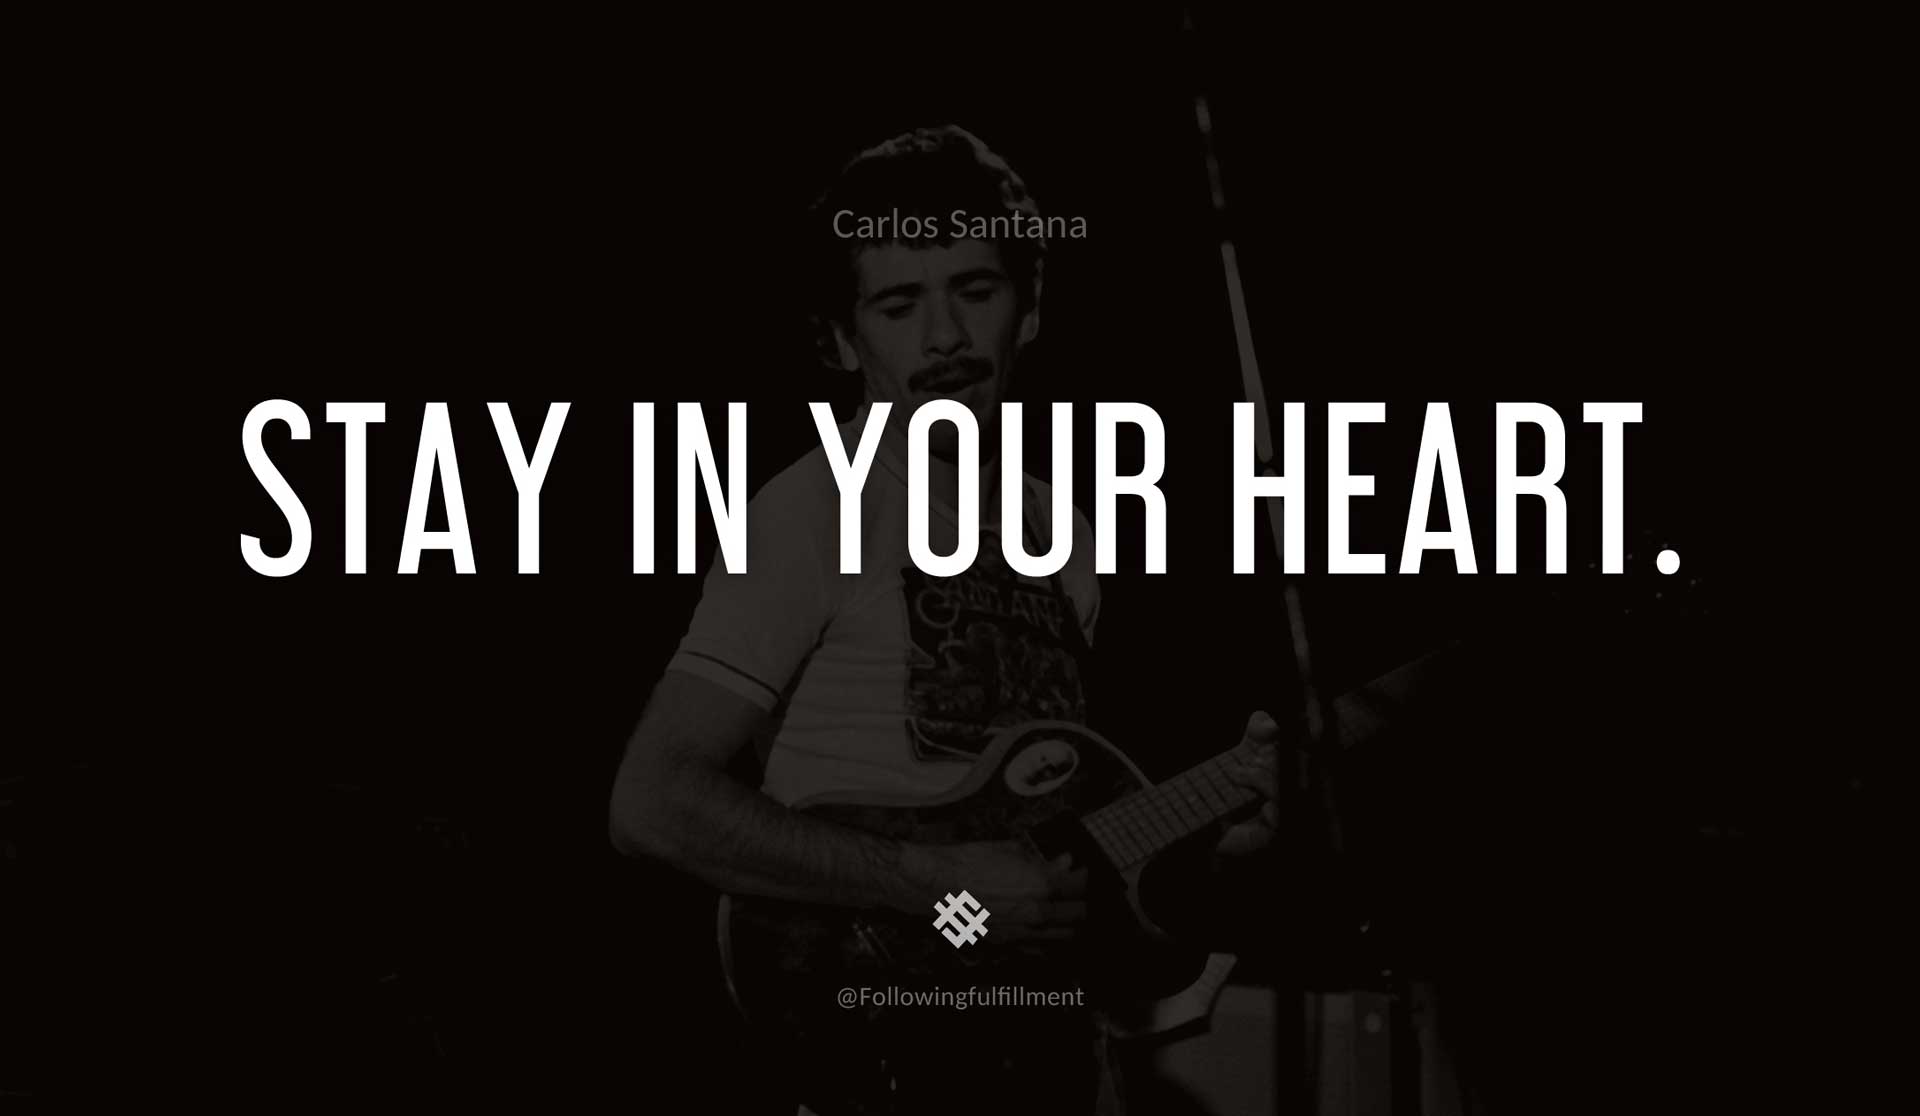 Stay-in-your-heart.-CARLOS-SANTANA-Quote.jpg